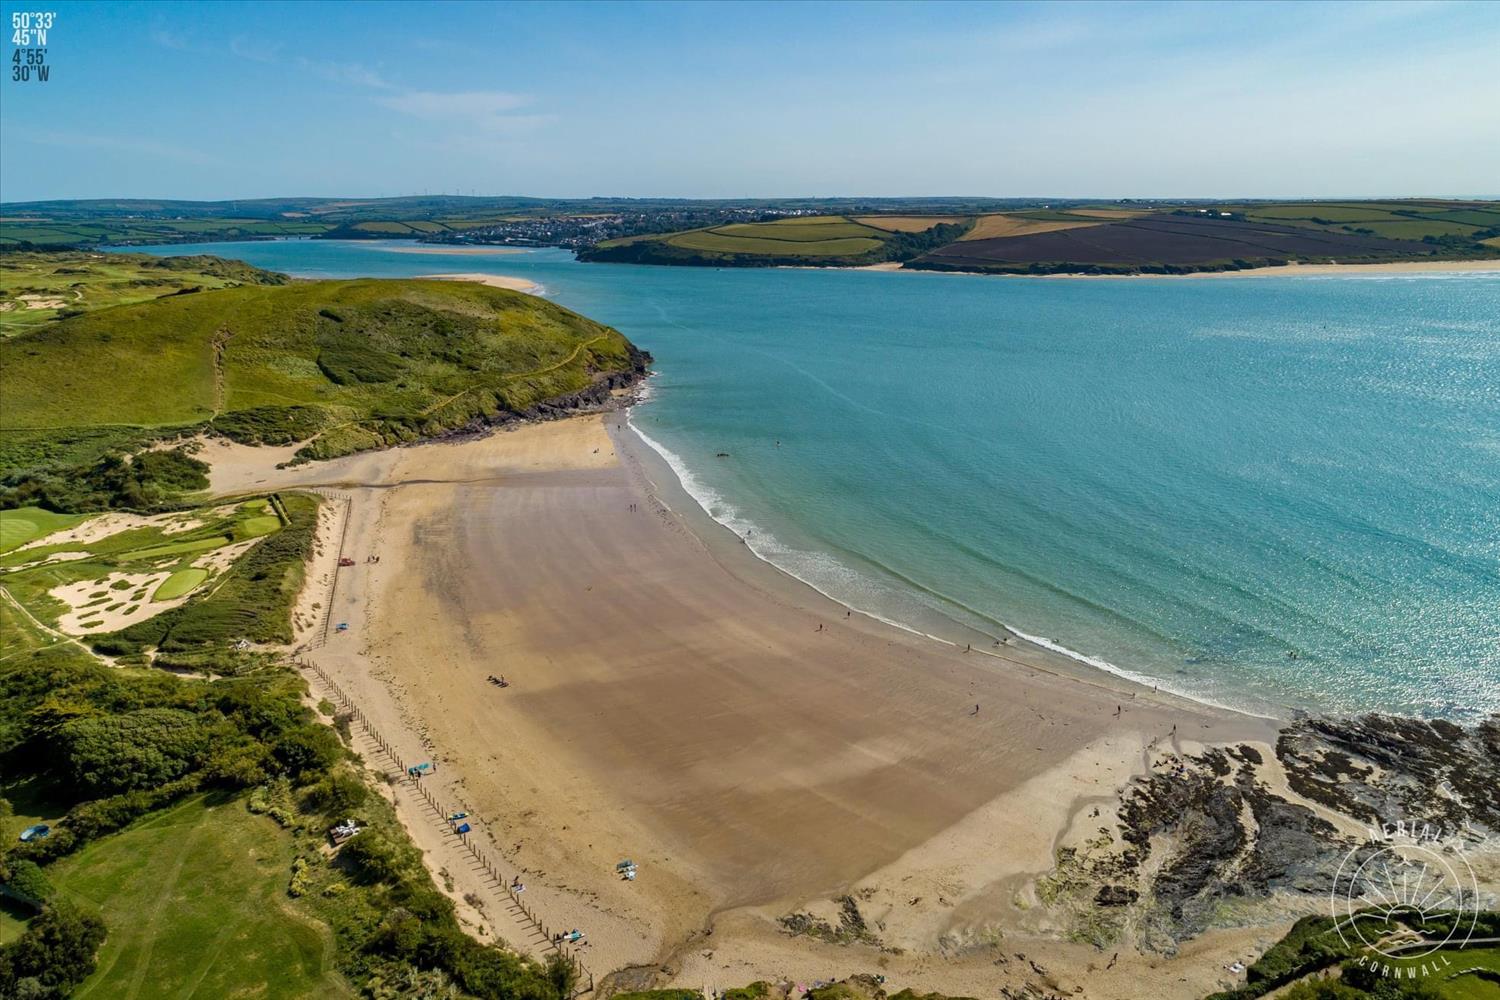 Daymer Bay, a sheltered sandy beach at the head of the Camel Estuary where the Camel River meets the Atlantic. Thie beach is deserted in this photo, but in the summer, families with young children love playing in these shallow waters